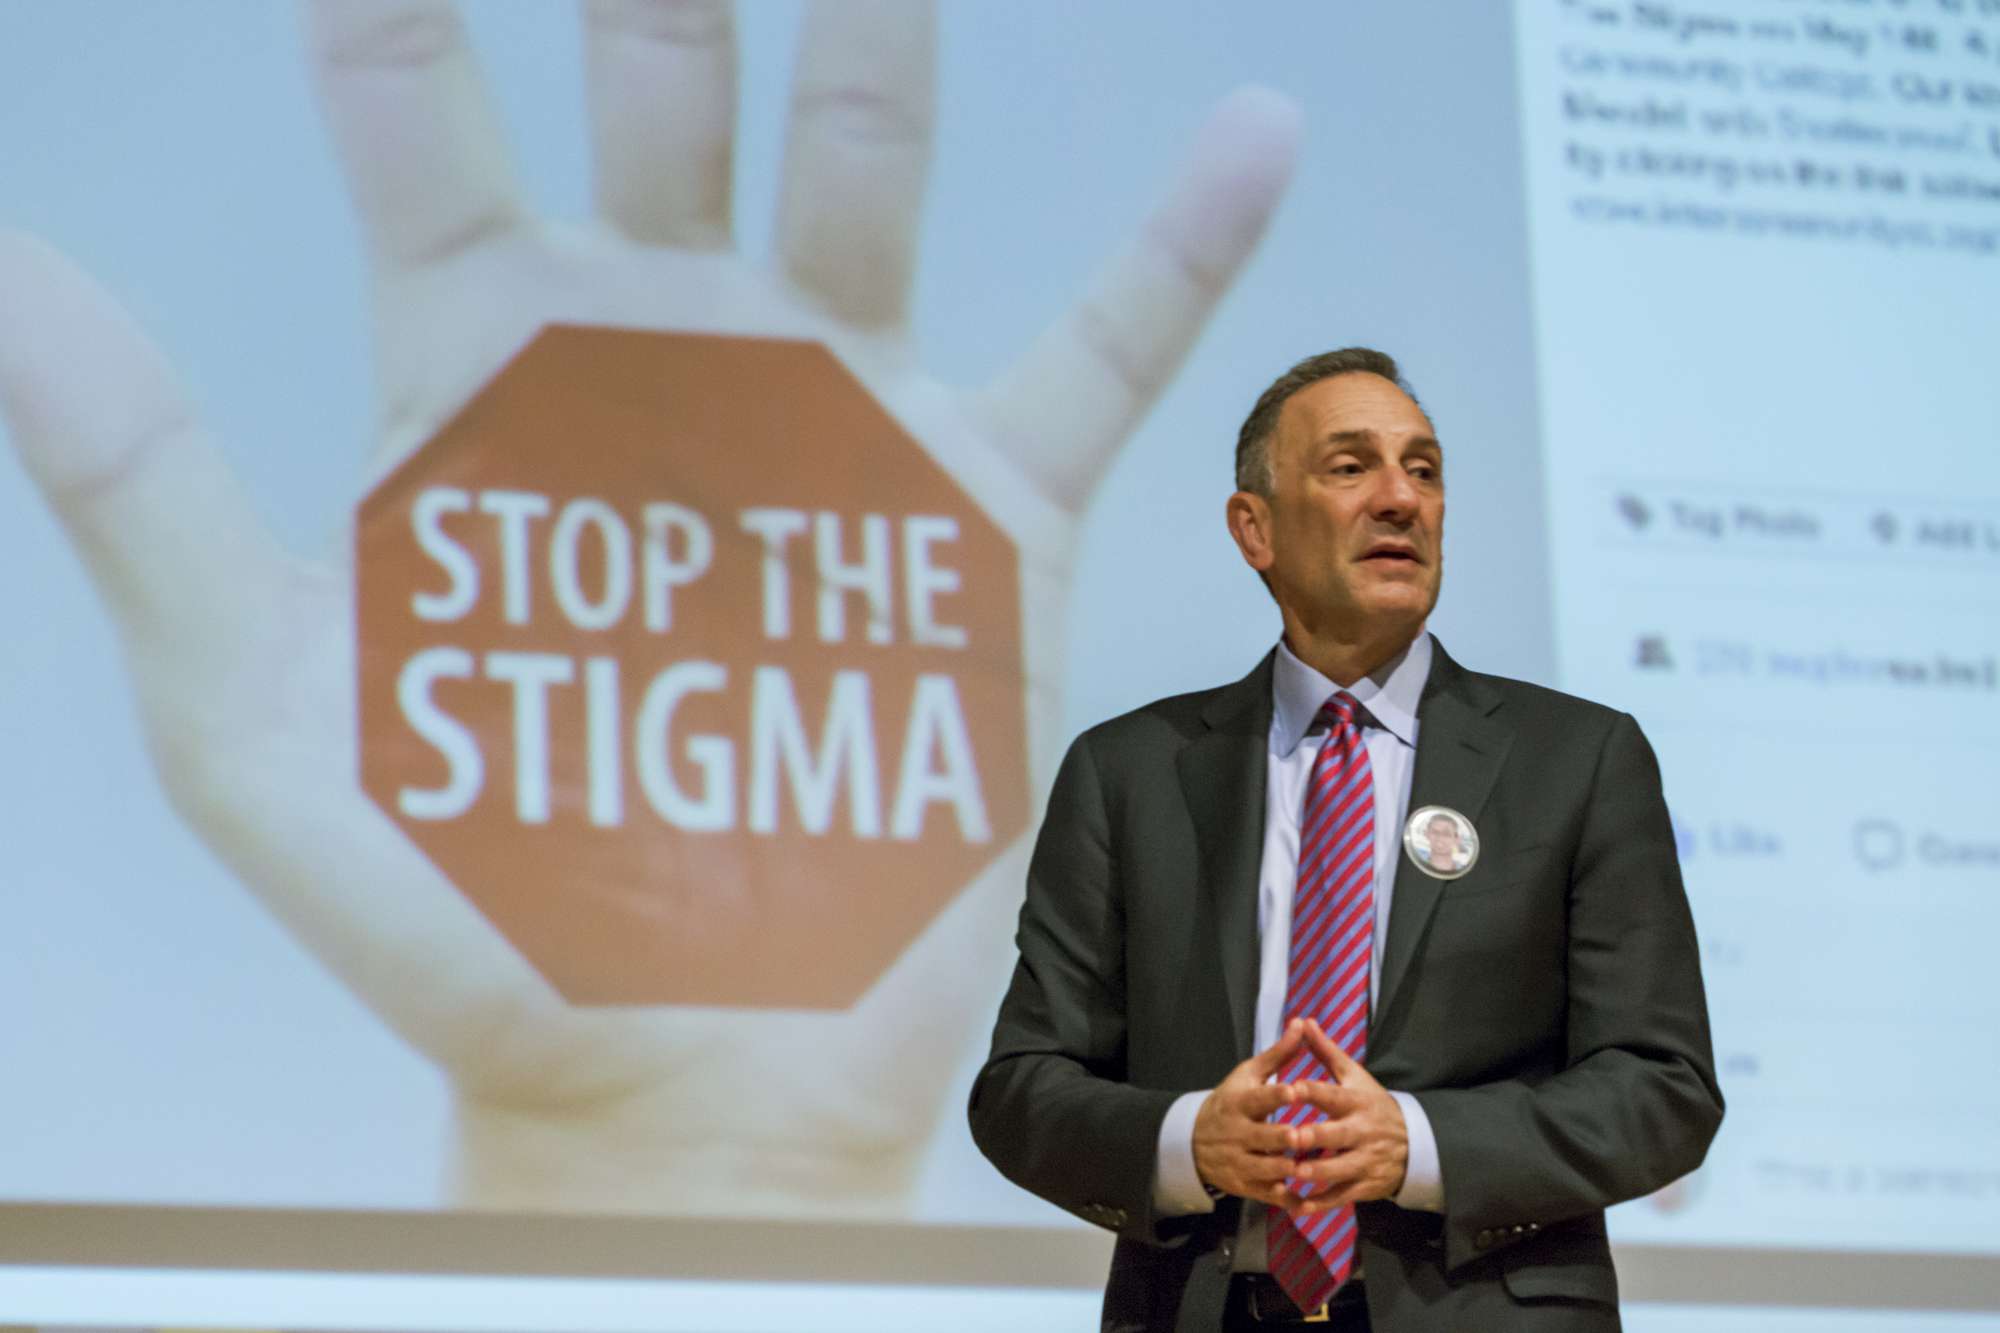 stop-the-stigma-photo-with-Gary-Mendell-at-a-presentation